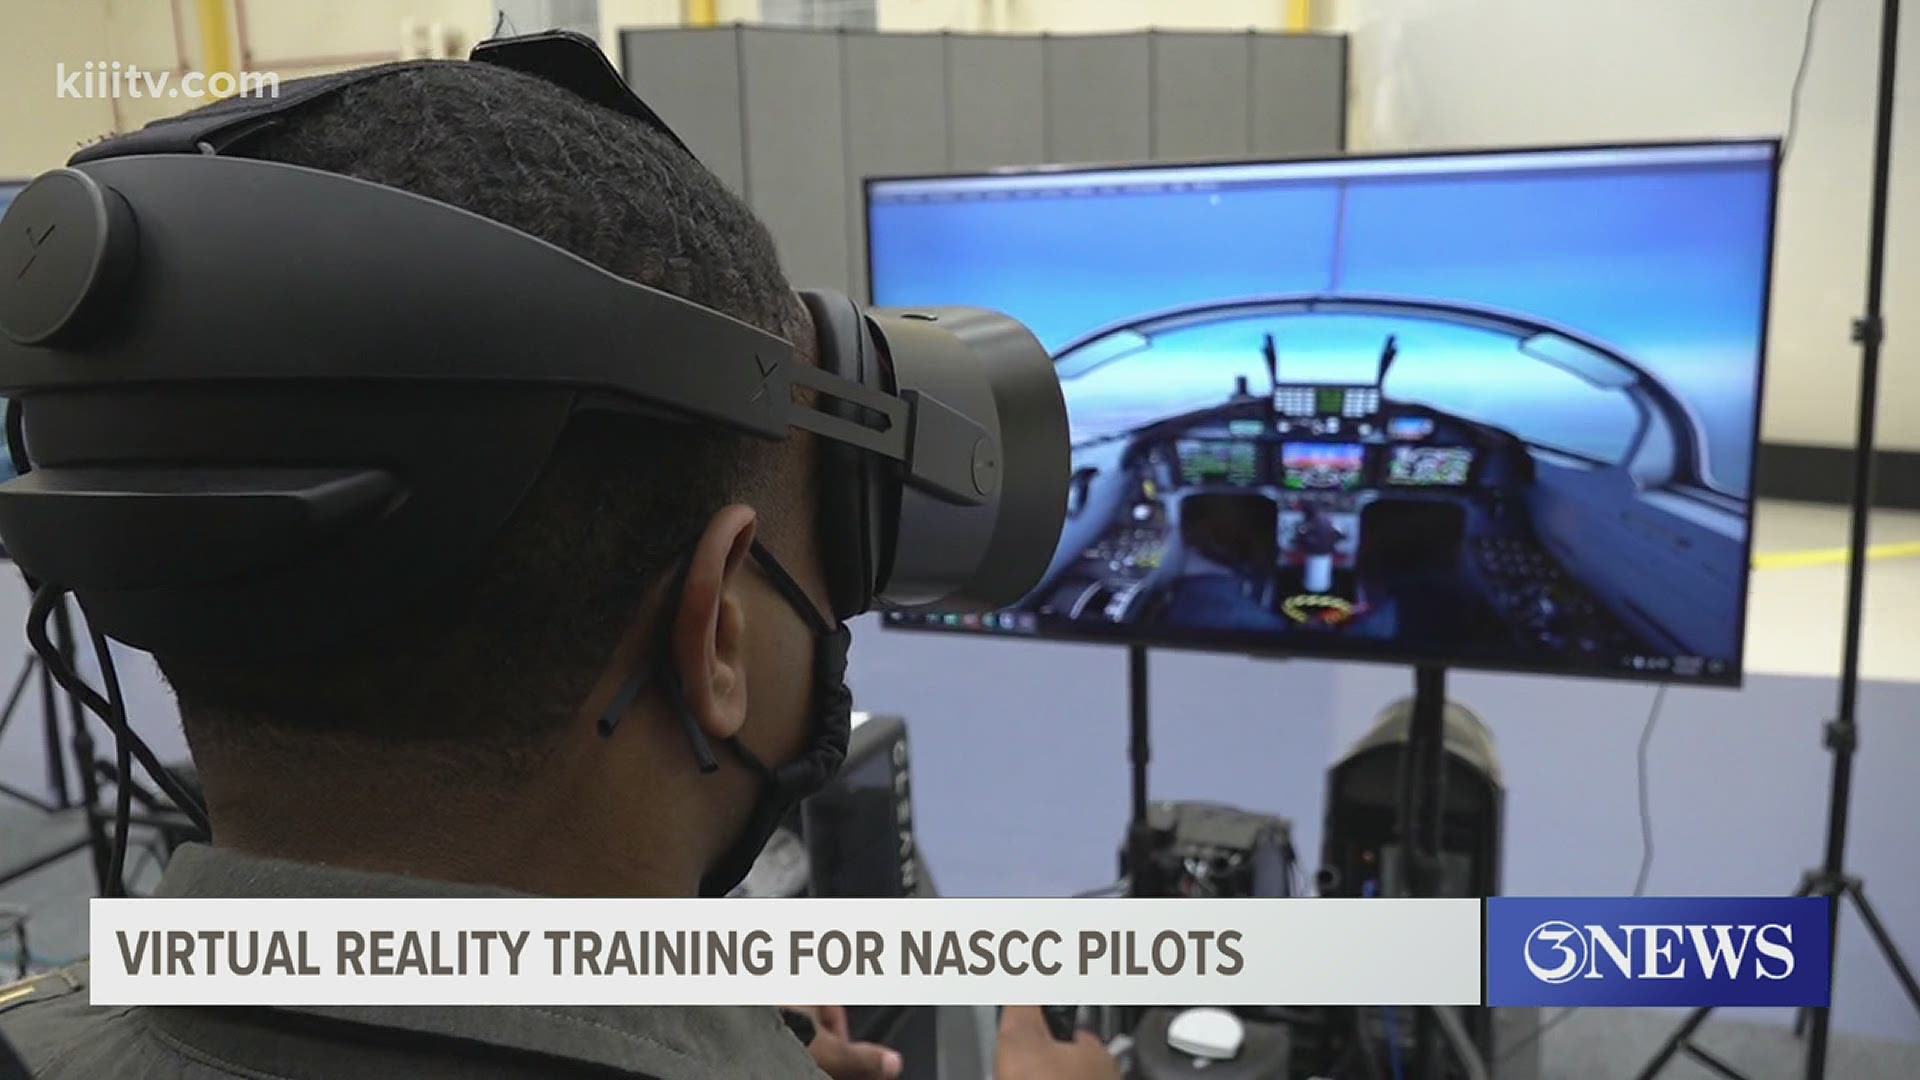 Project Avenger might sound like the next superhero movie, but it's actually part of a new training initiative for pilots at Naval Air Station-Corpus Christi.